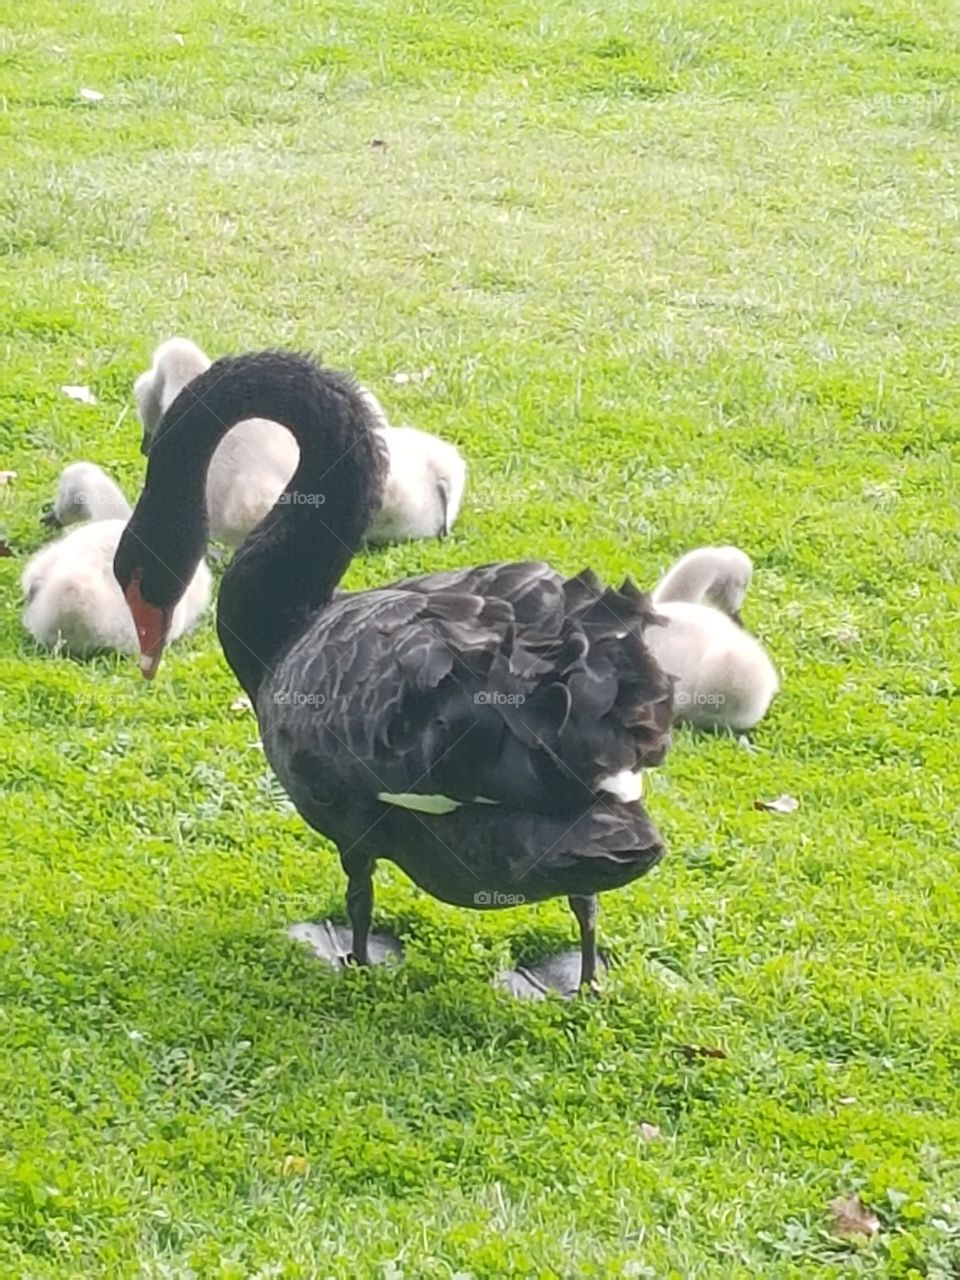 A black swan with some baby swans